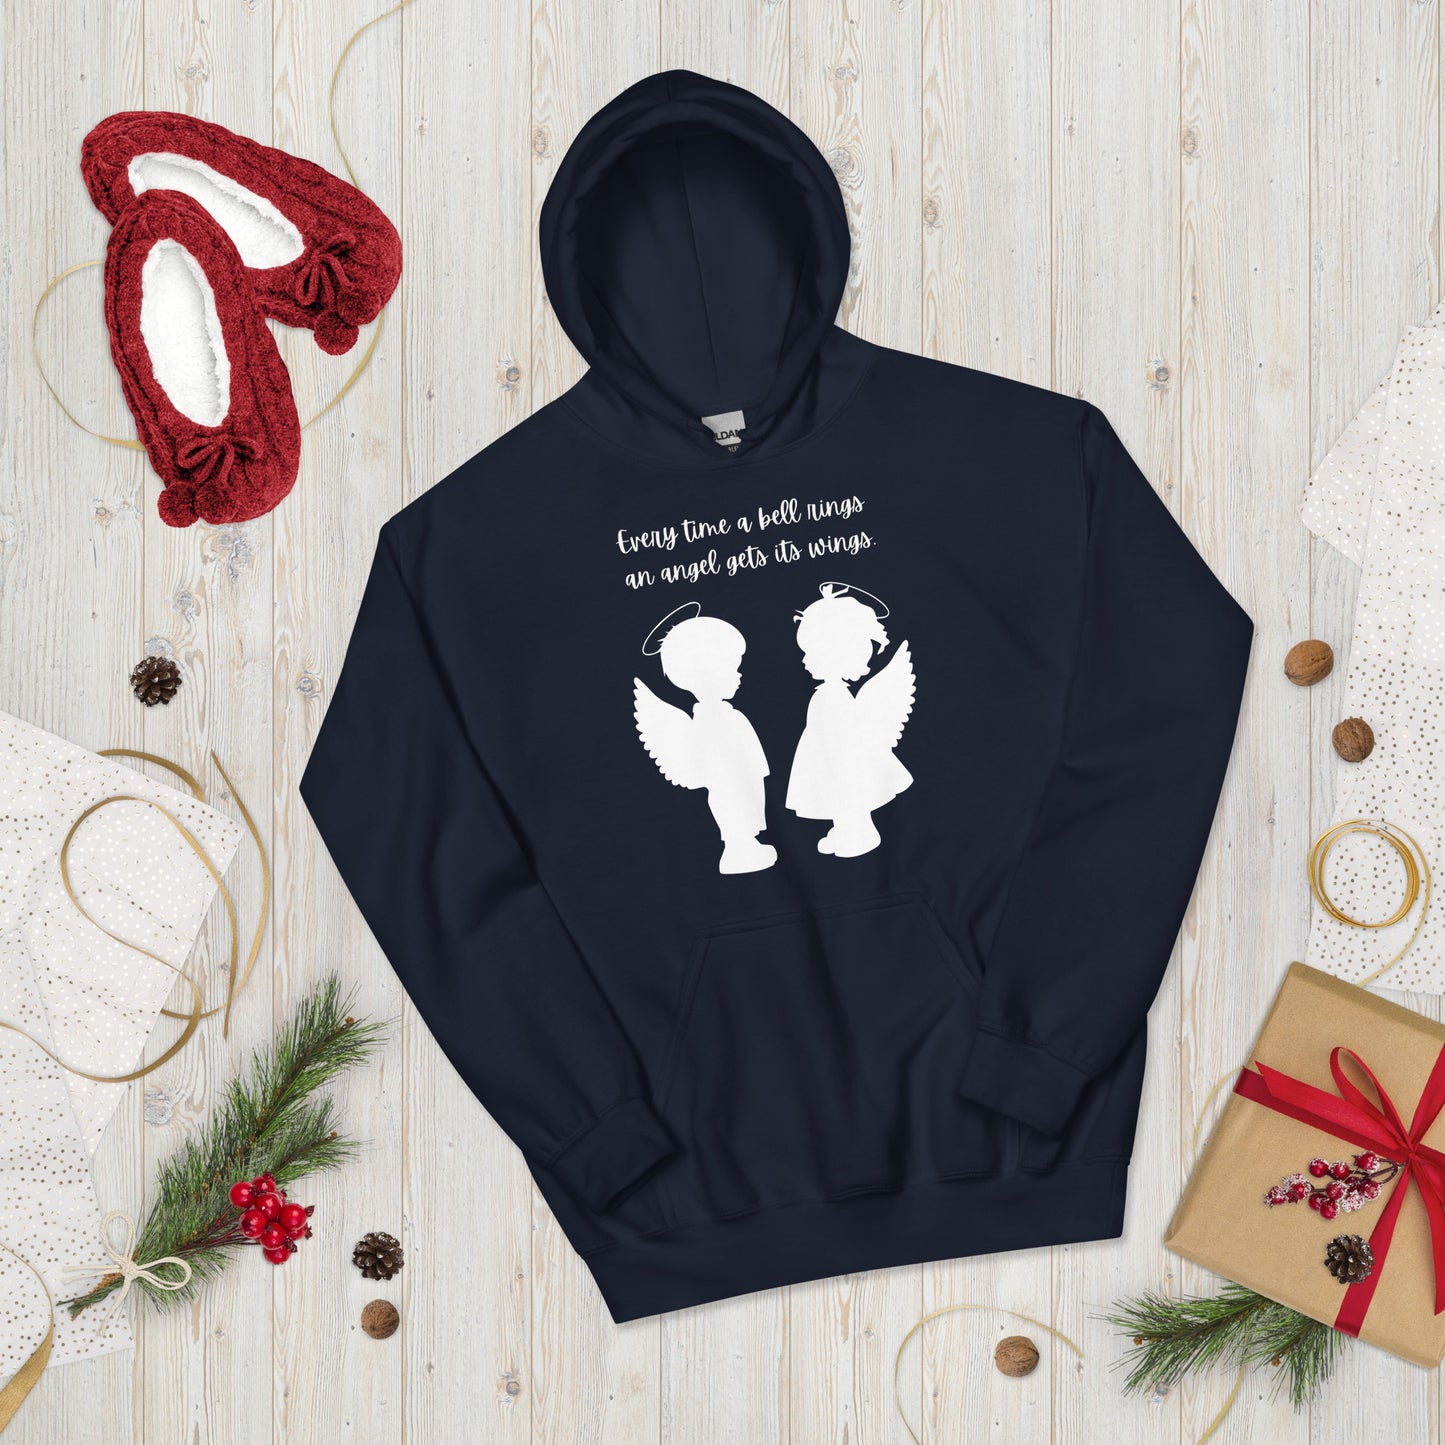 Every Time a Bell Rings an Angel Gets Its Wings, Unisex Hoodie, It’s a Wonderful Life, Inspirational Christmas Message